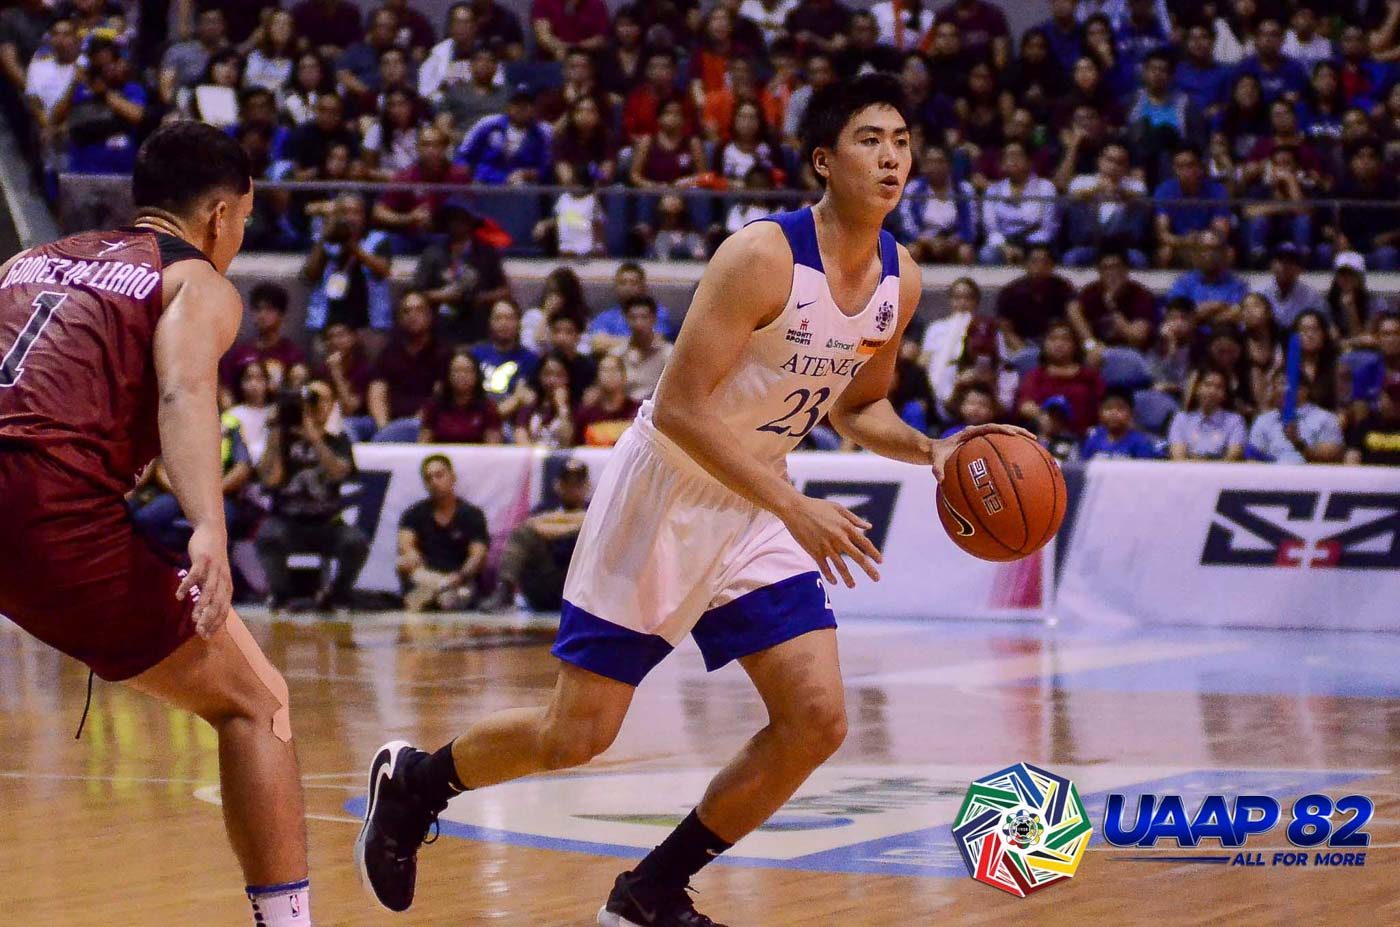 After concussion scare, Ateneo’s Navarro likely back vs UP